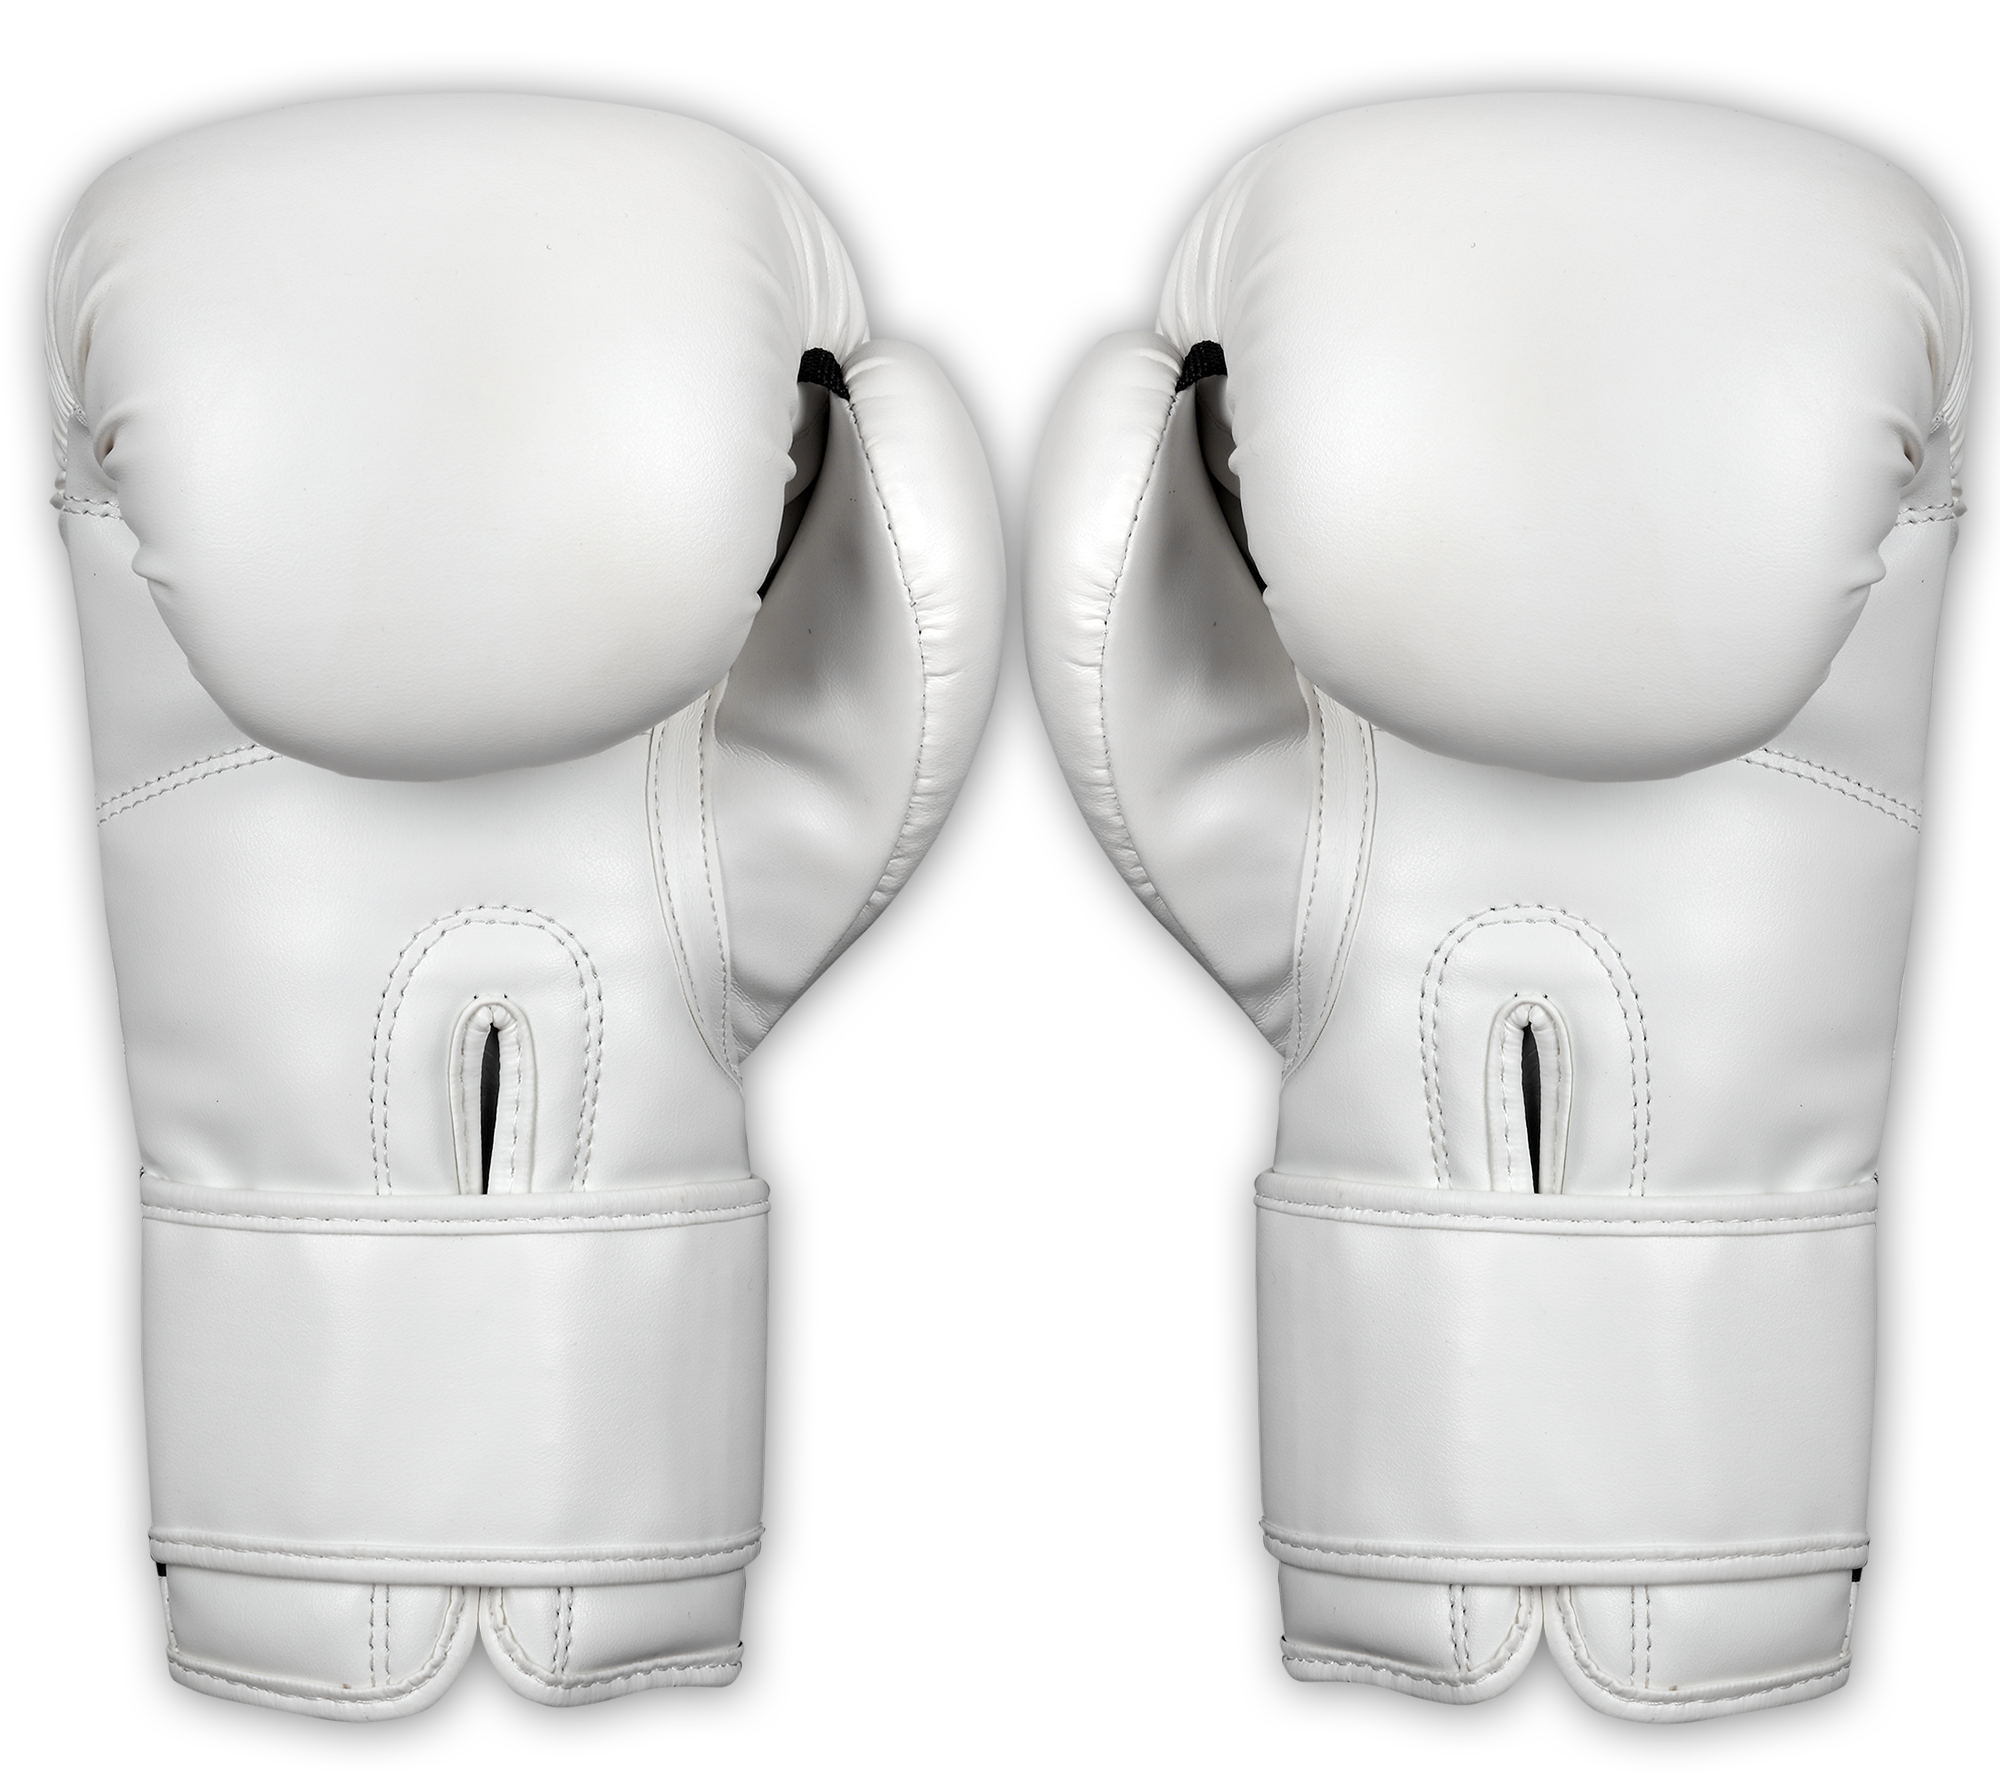 The best kickboxing gloves can be found here